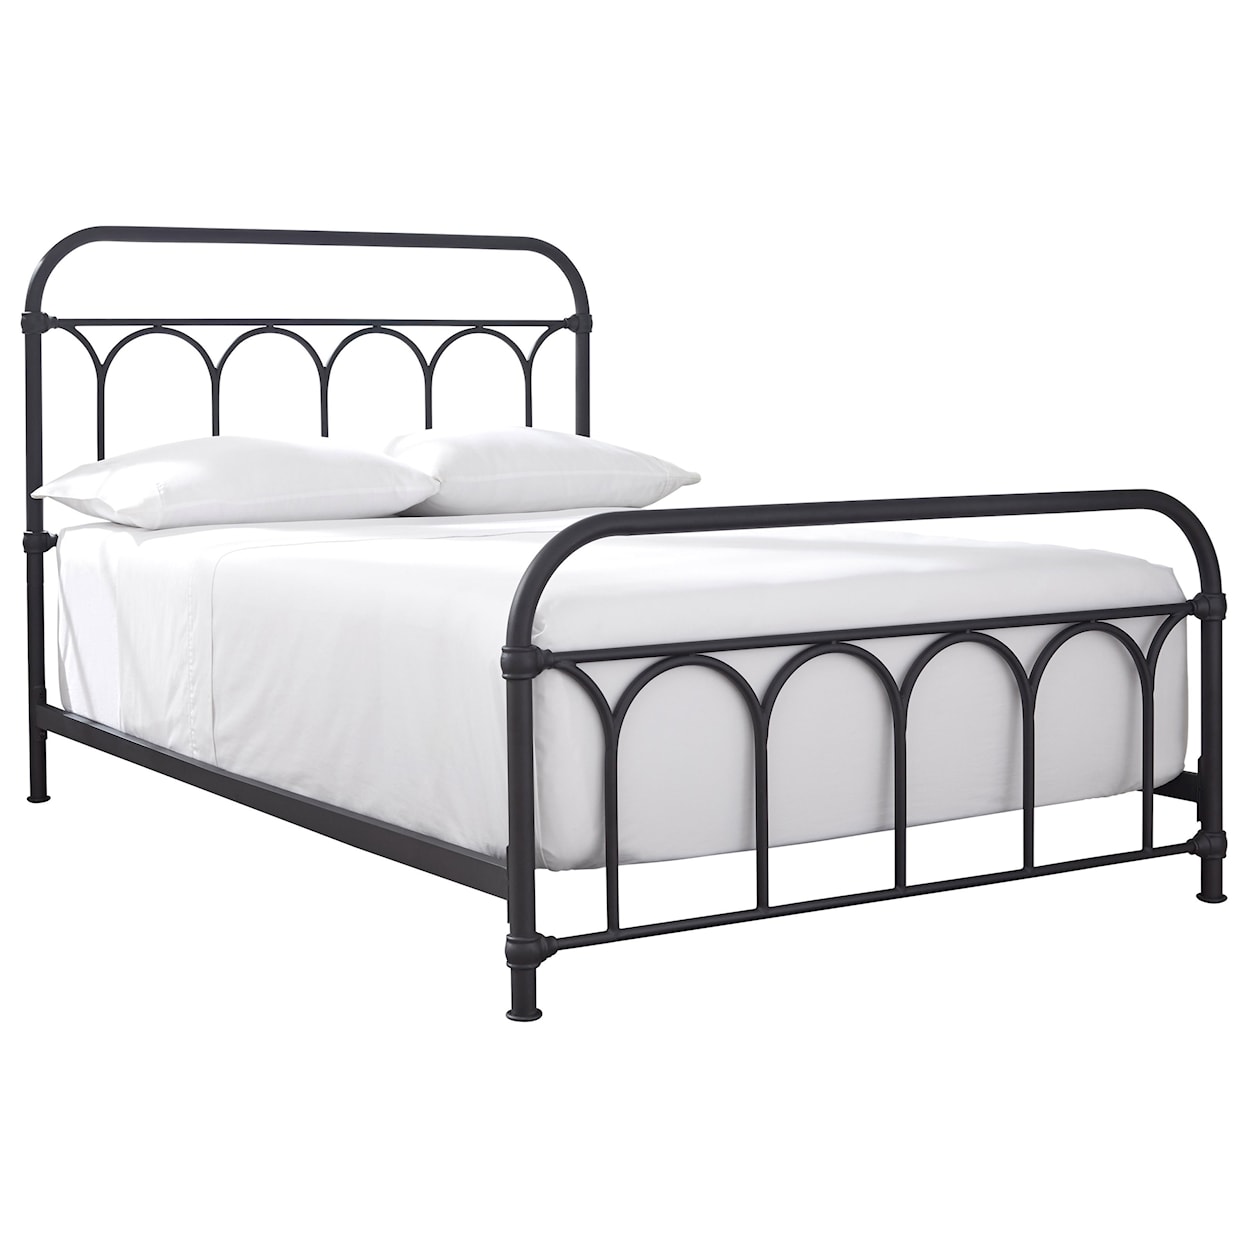 Signature Design by Ashley Nashburg Metal Queen Bed